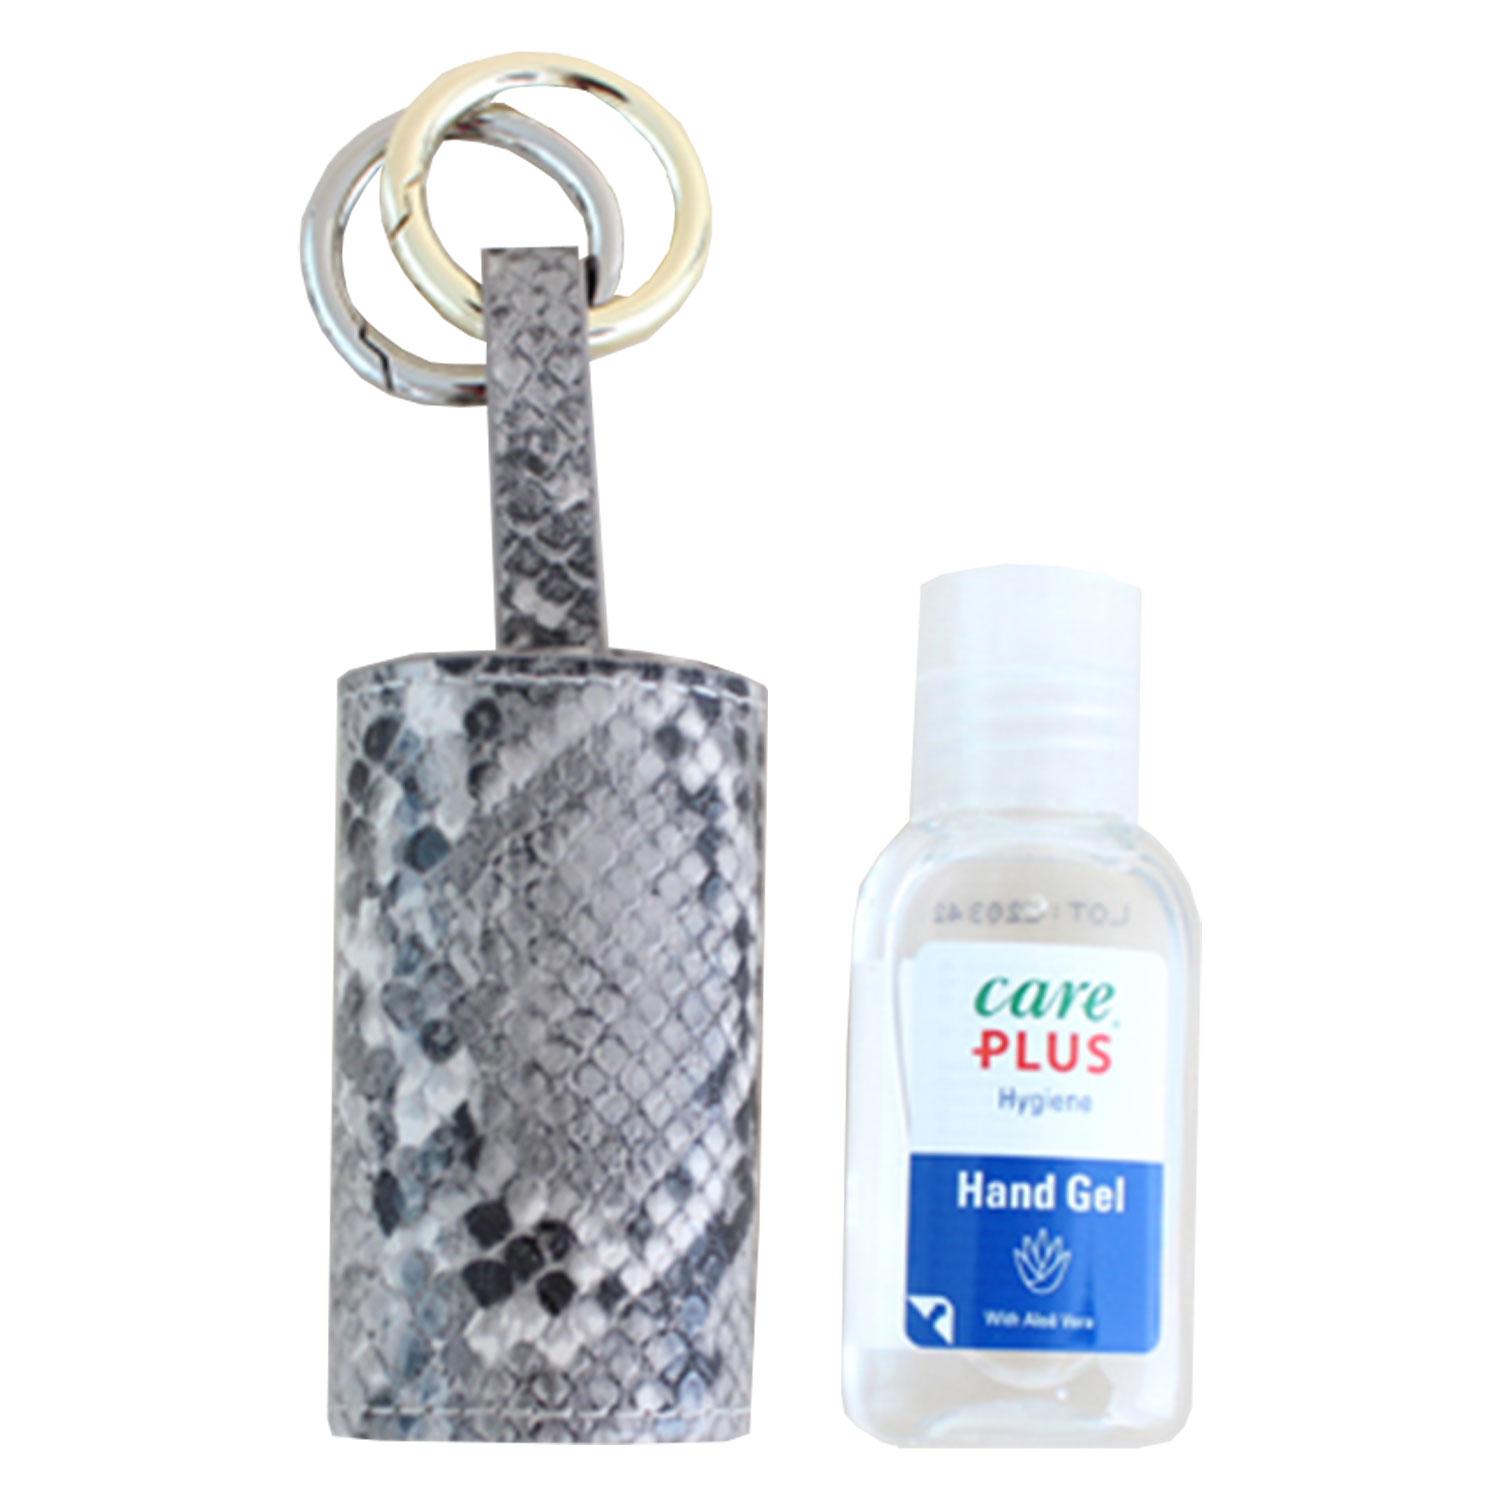 CARRY & CO. - Handcare Leather Case with Gold and Silver Key Ring Gray Snake